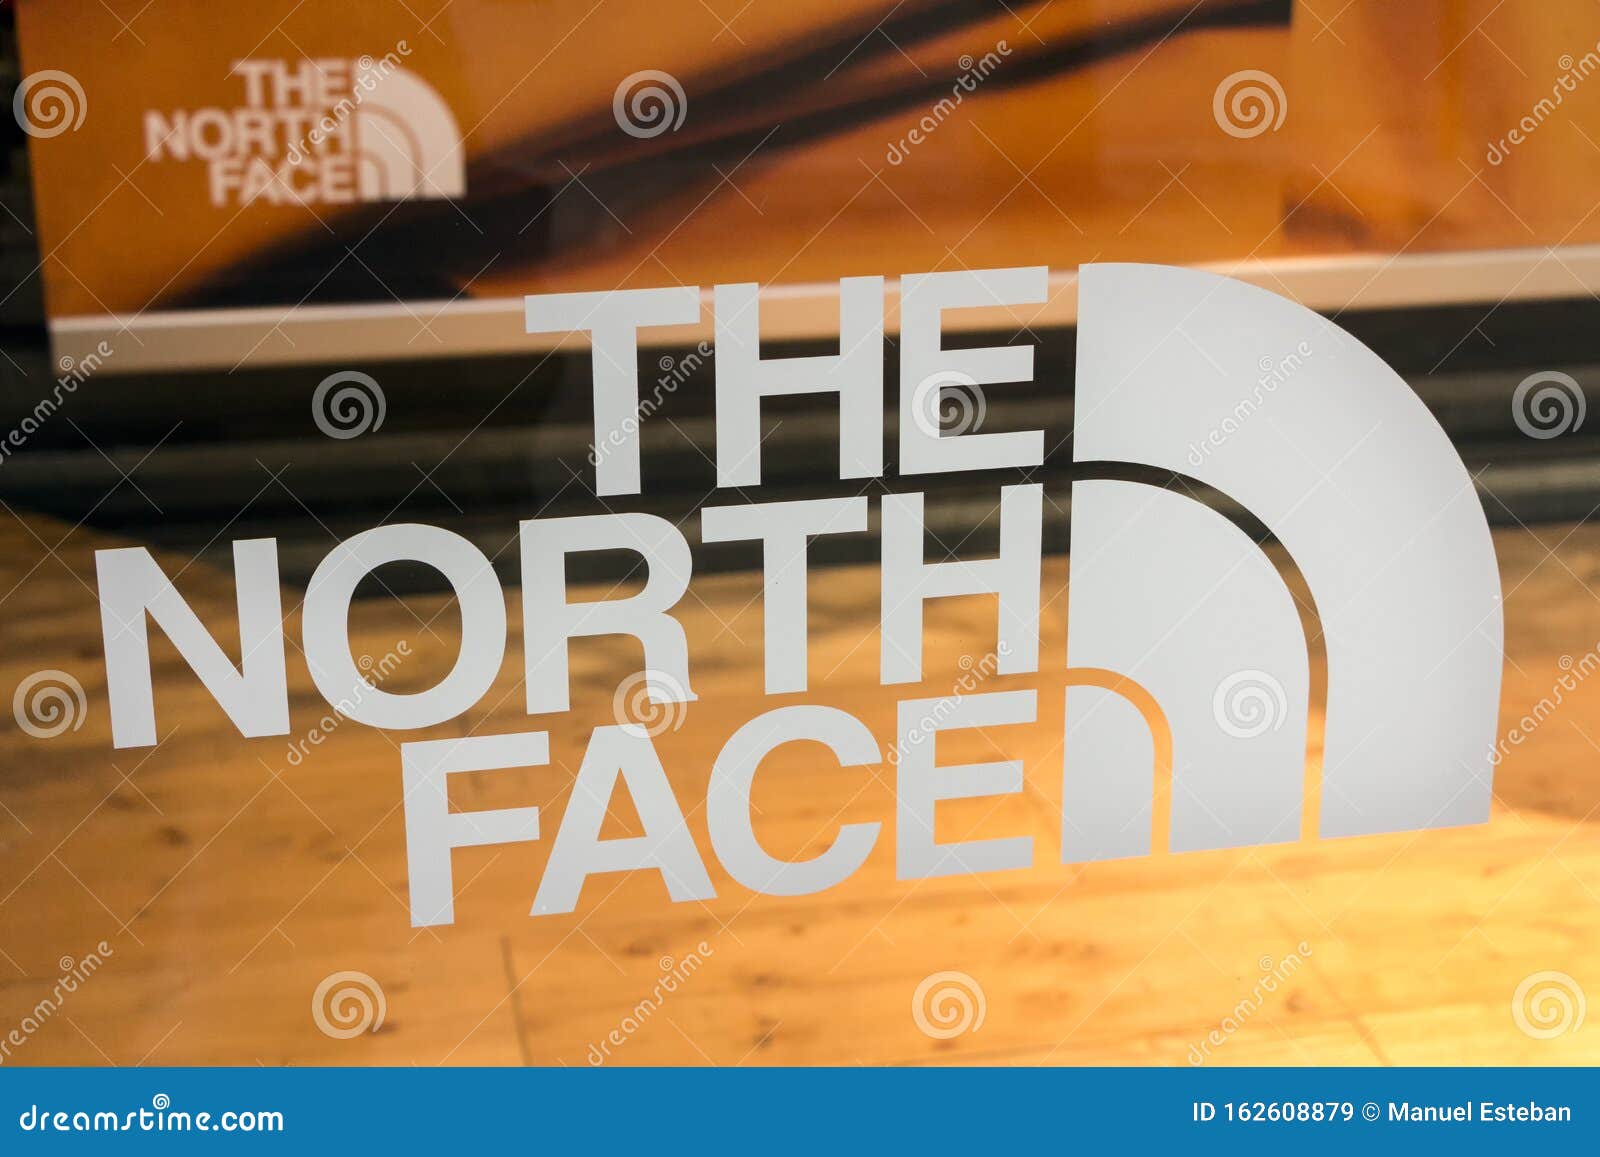 The North Face Logo on the North Face Store Editorial Stock Image ...